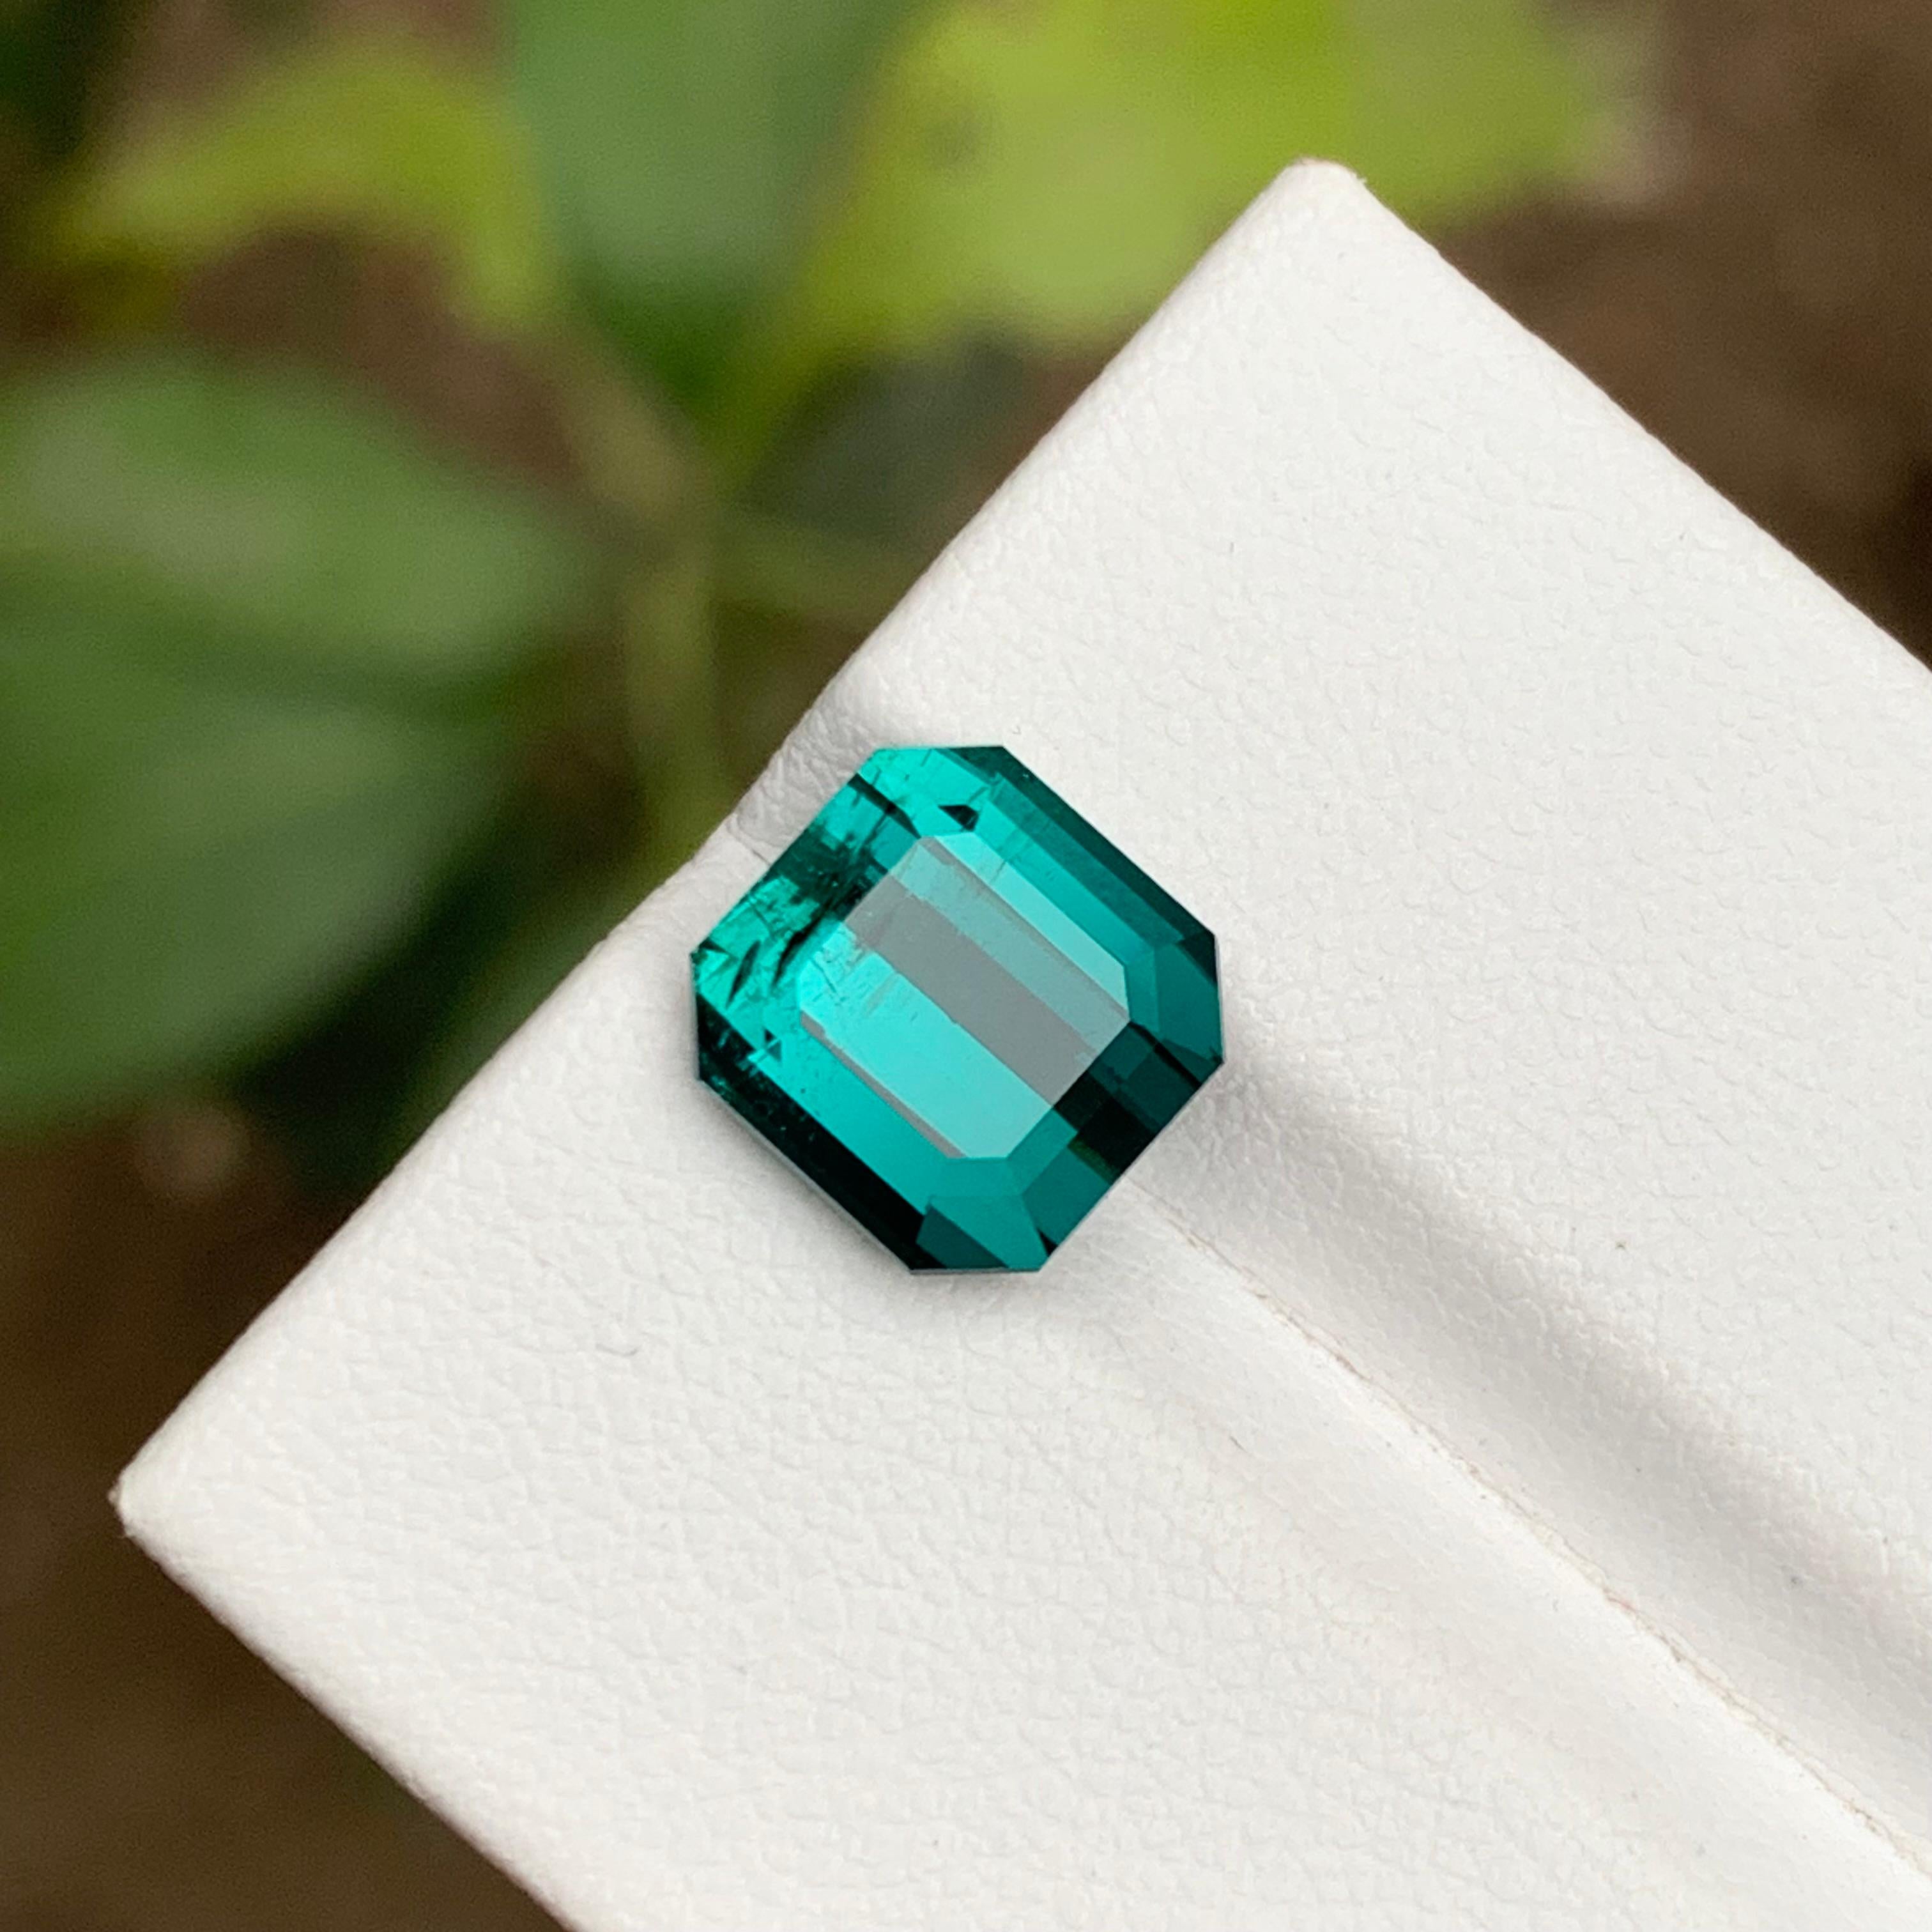 Rare Vibrant Lagoon Blue Natural Tourmaline Gemstone 4.20Ct Emerald Cut for Ring For Sale 1